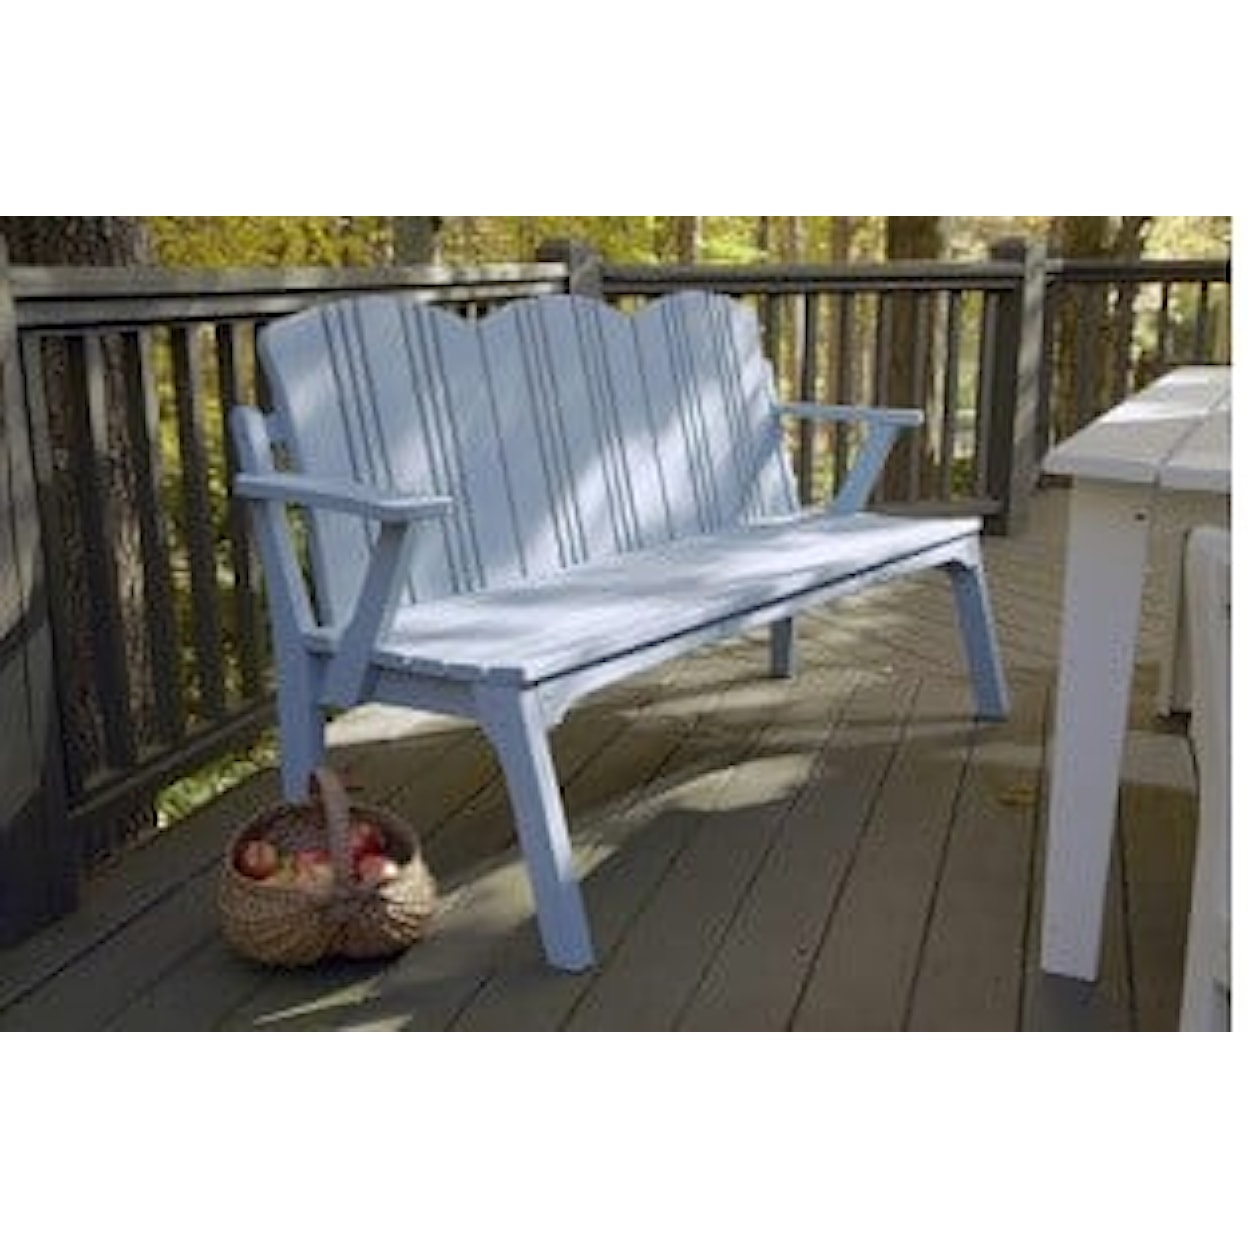 Uwharrie Chair The Carolina Preserves 3-SEAT BENCH WITH BACK